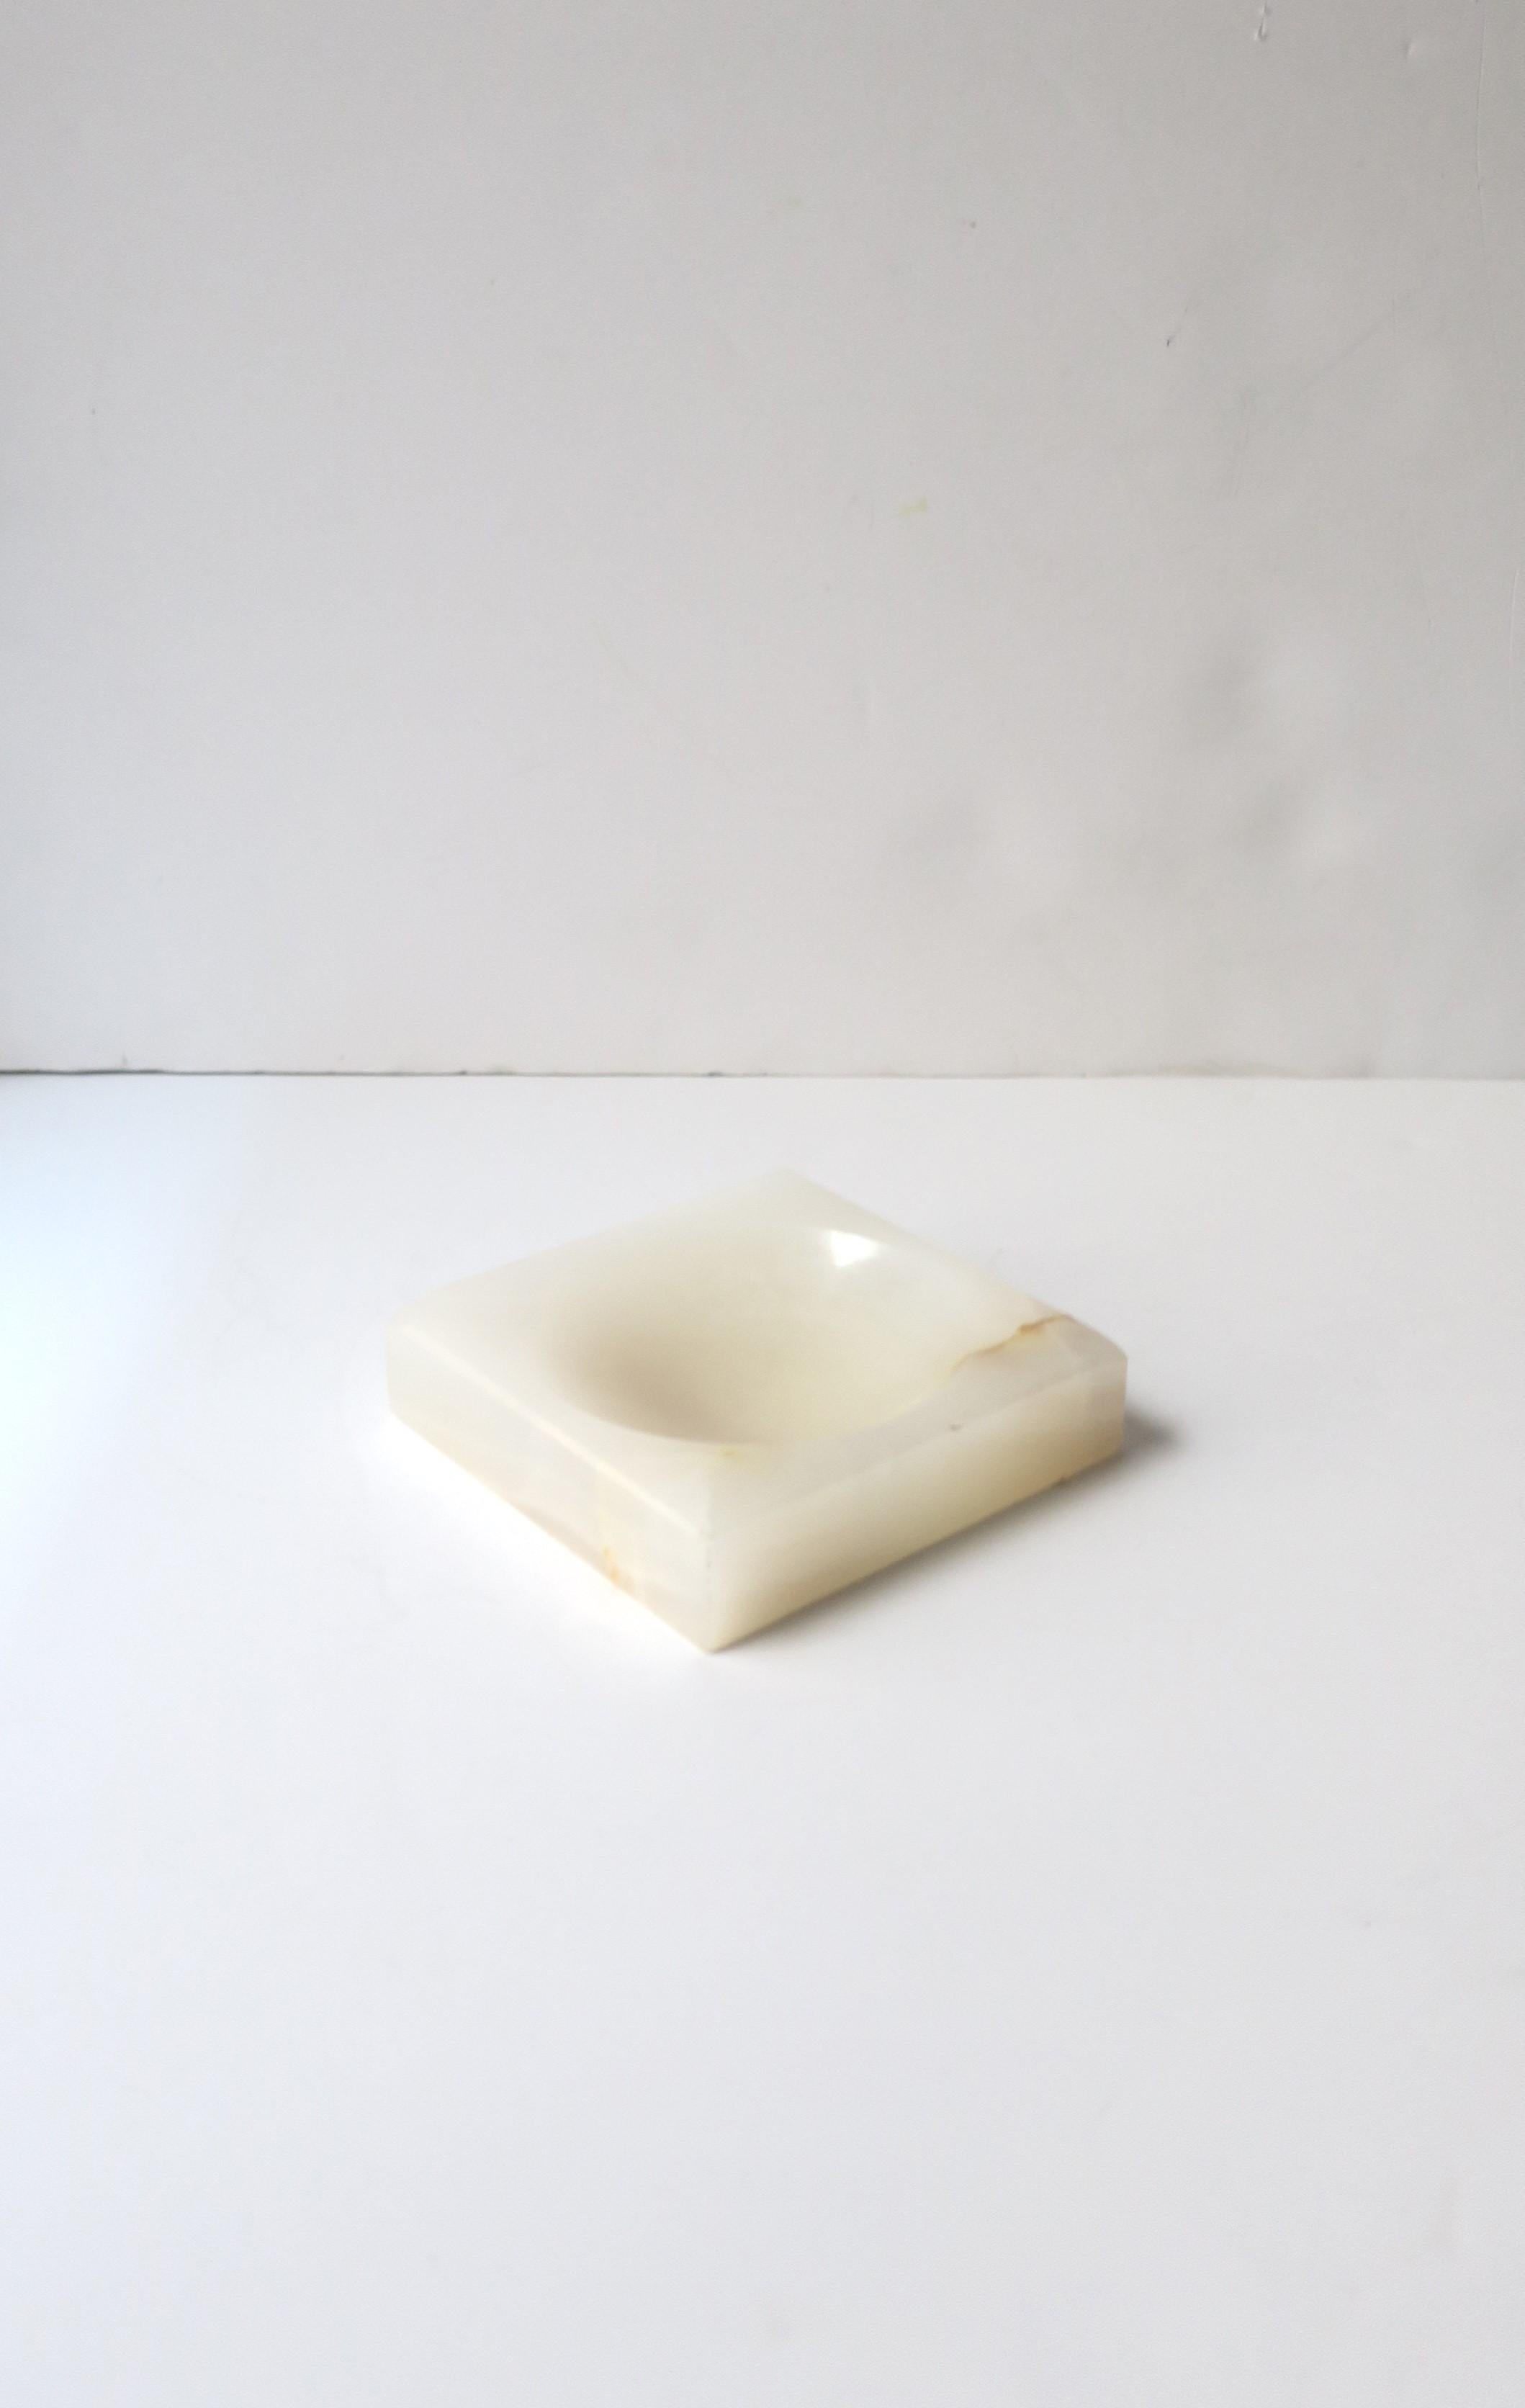 An Italian white/off white onyx marble ashtray (or jewelry dish), Mid-Century Modern period, circa mid-20th century, Italy. Use as ashtray, with two indents for cig., or use to hold jewelry (as demonstrated) or other small items on a desk, vanity,